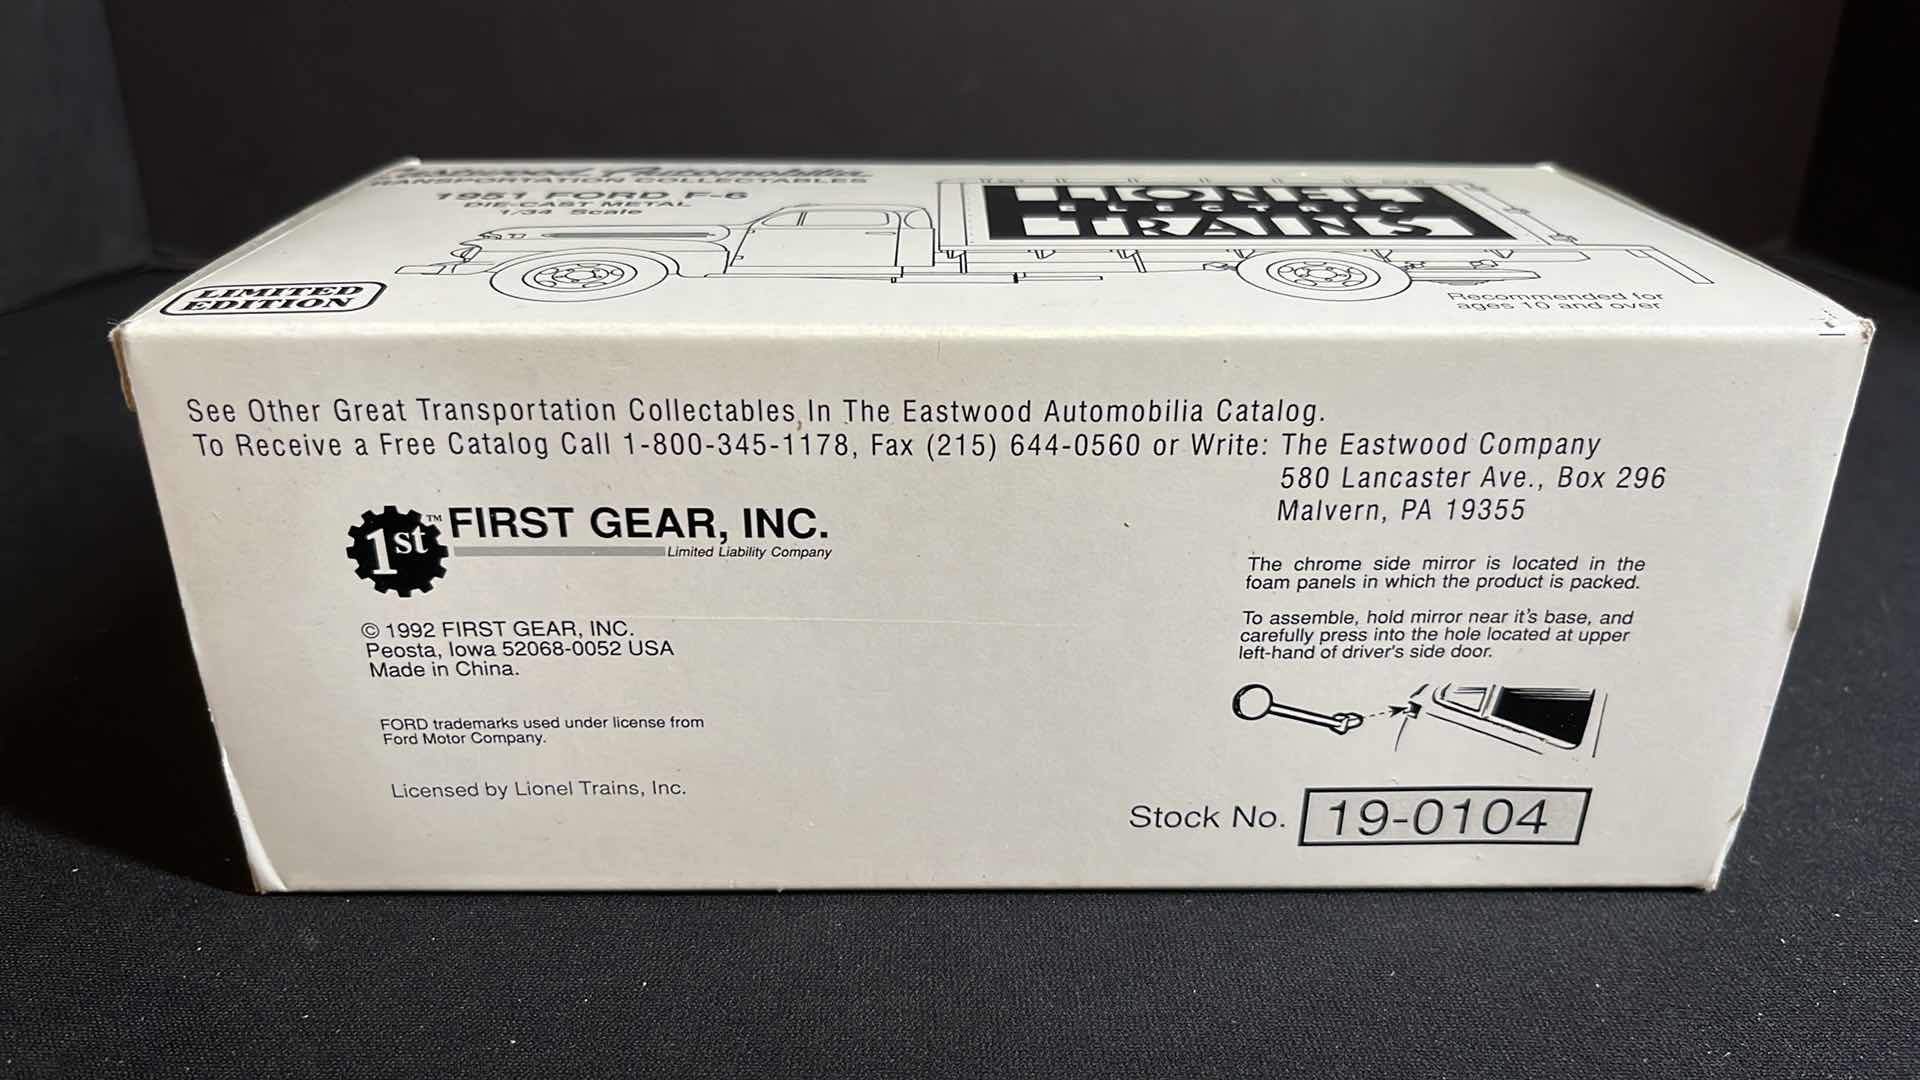 Photo 9 of NIB FIRST GEAR INC EASTWOOD AUTOMOBILIA TRANSPORTATION COLLECTABLES LIONEL ELECTRIC TRAINS DIE-CAST METAL 1/34 SCALE 1951 FORD F-6, 1992 (STOCK #19-0104)